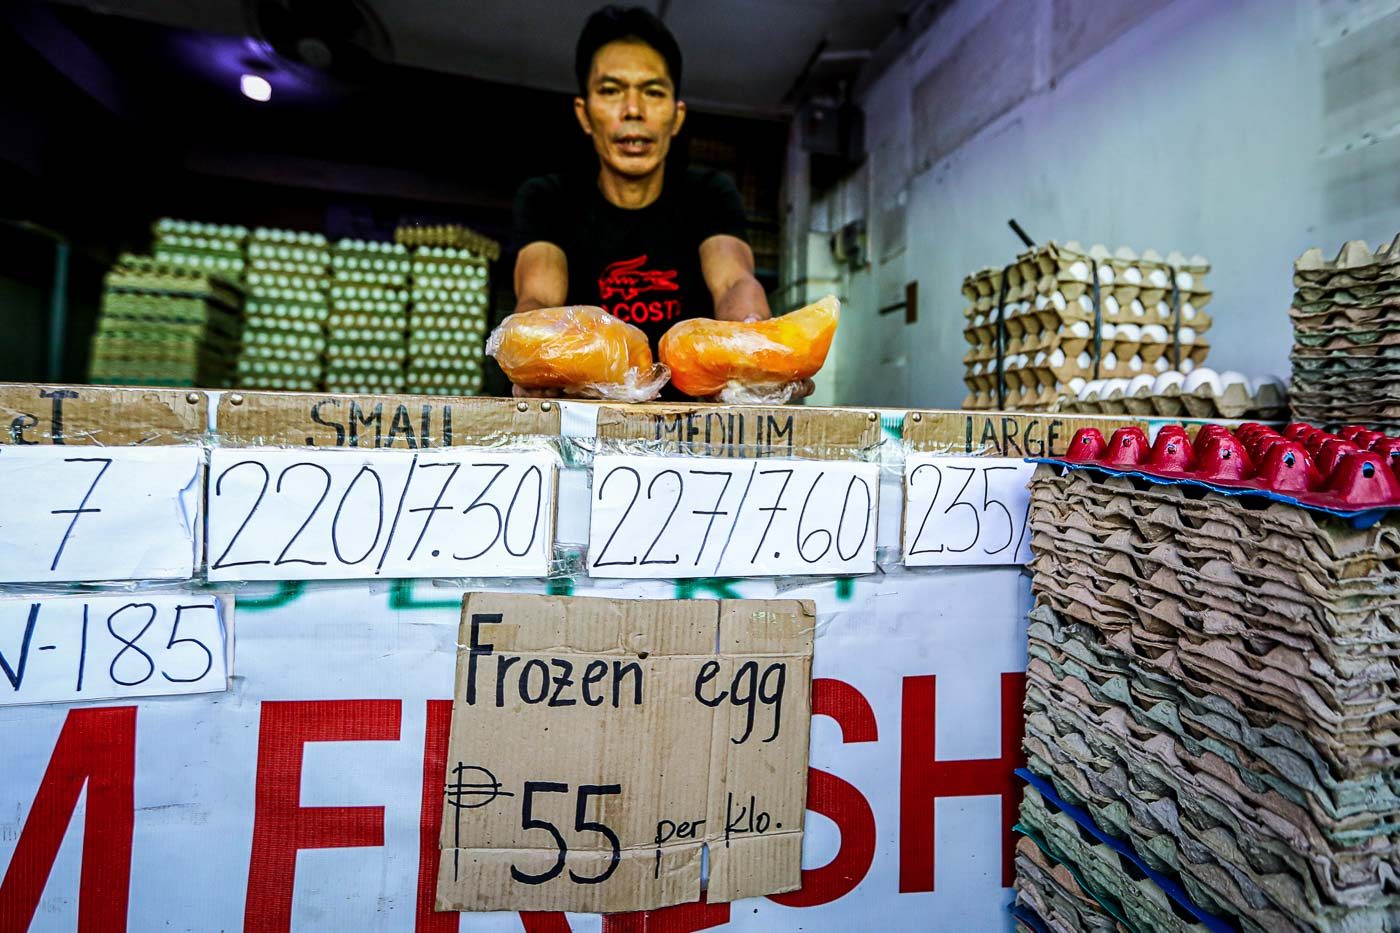 As prices soar, Filipinos turn to frozen eggs meant for pastry makers